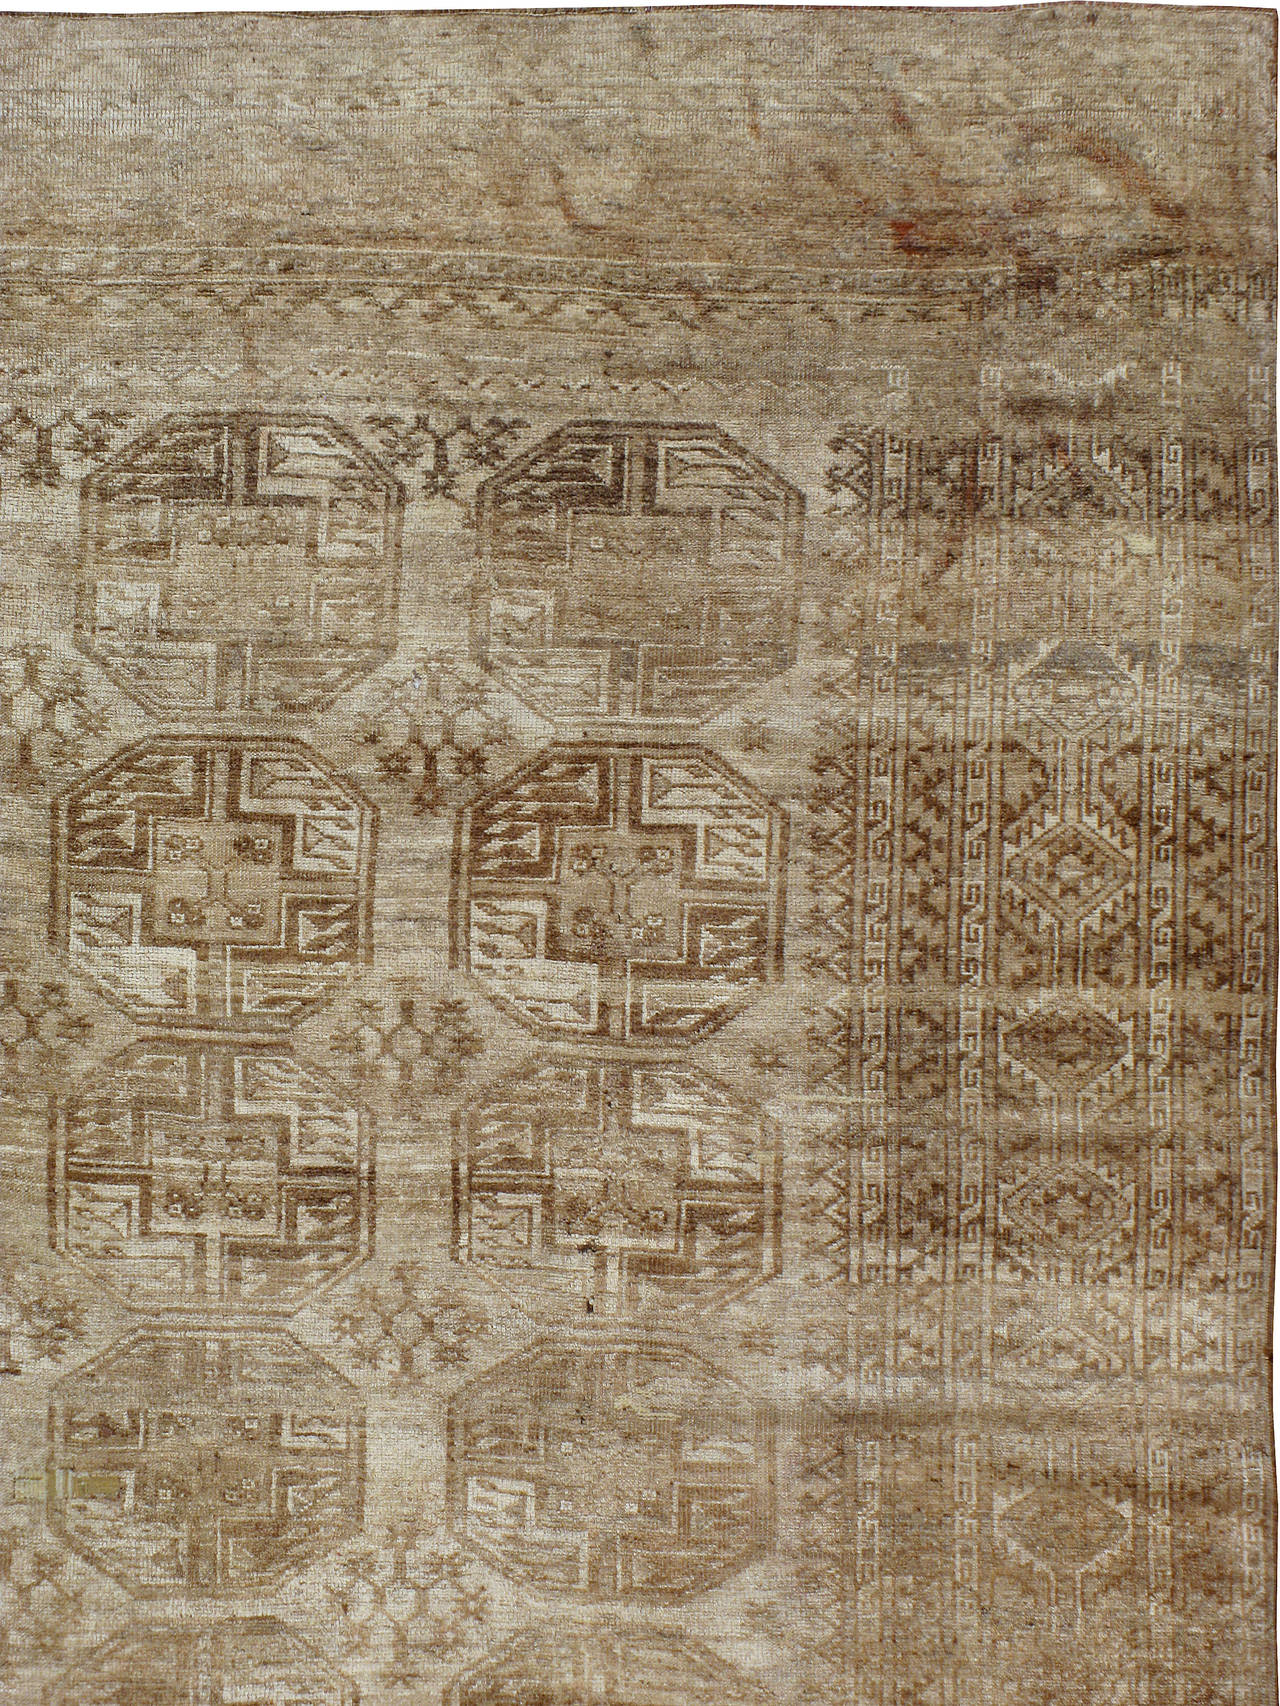 Tribal Antique Central Asian Bokhara Rug